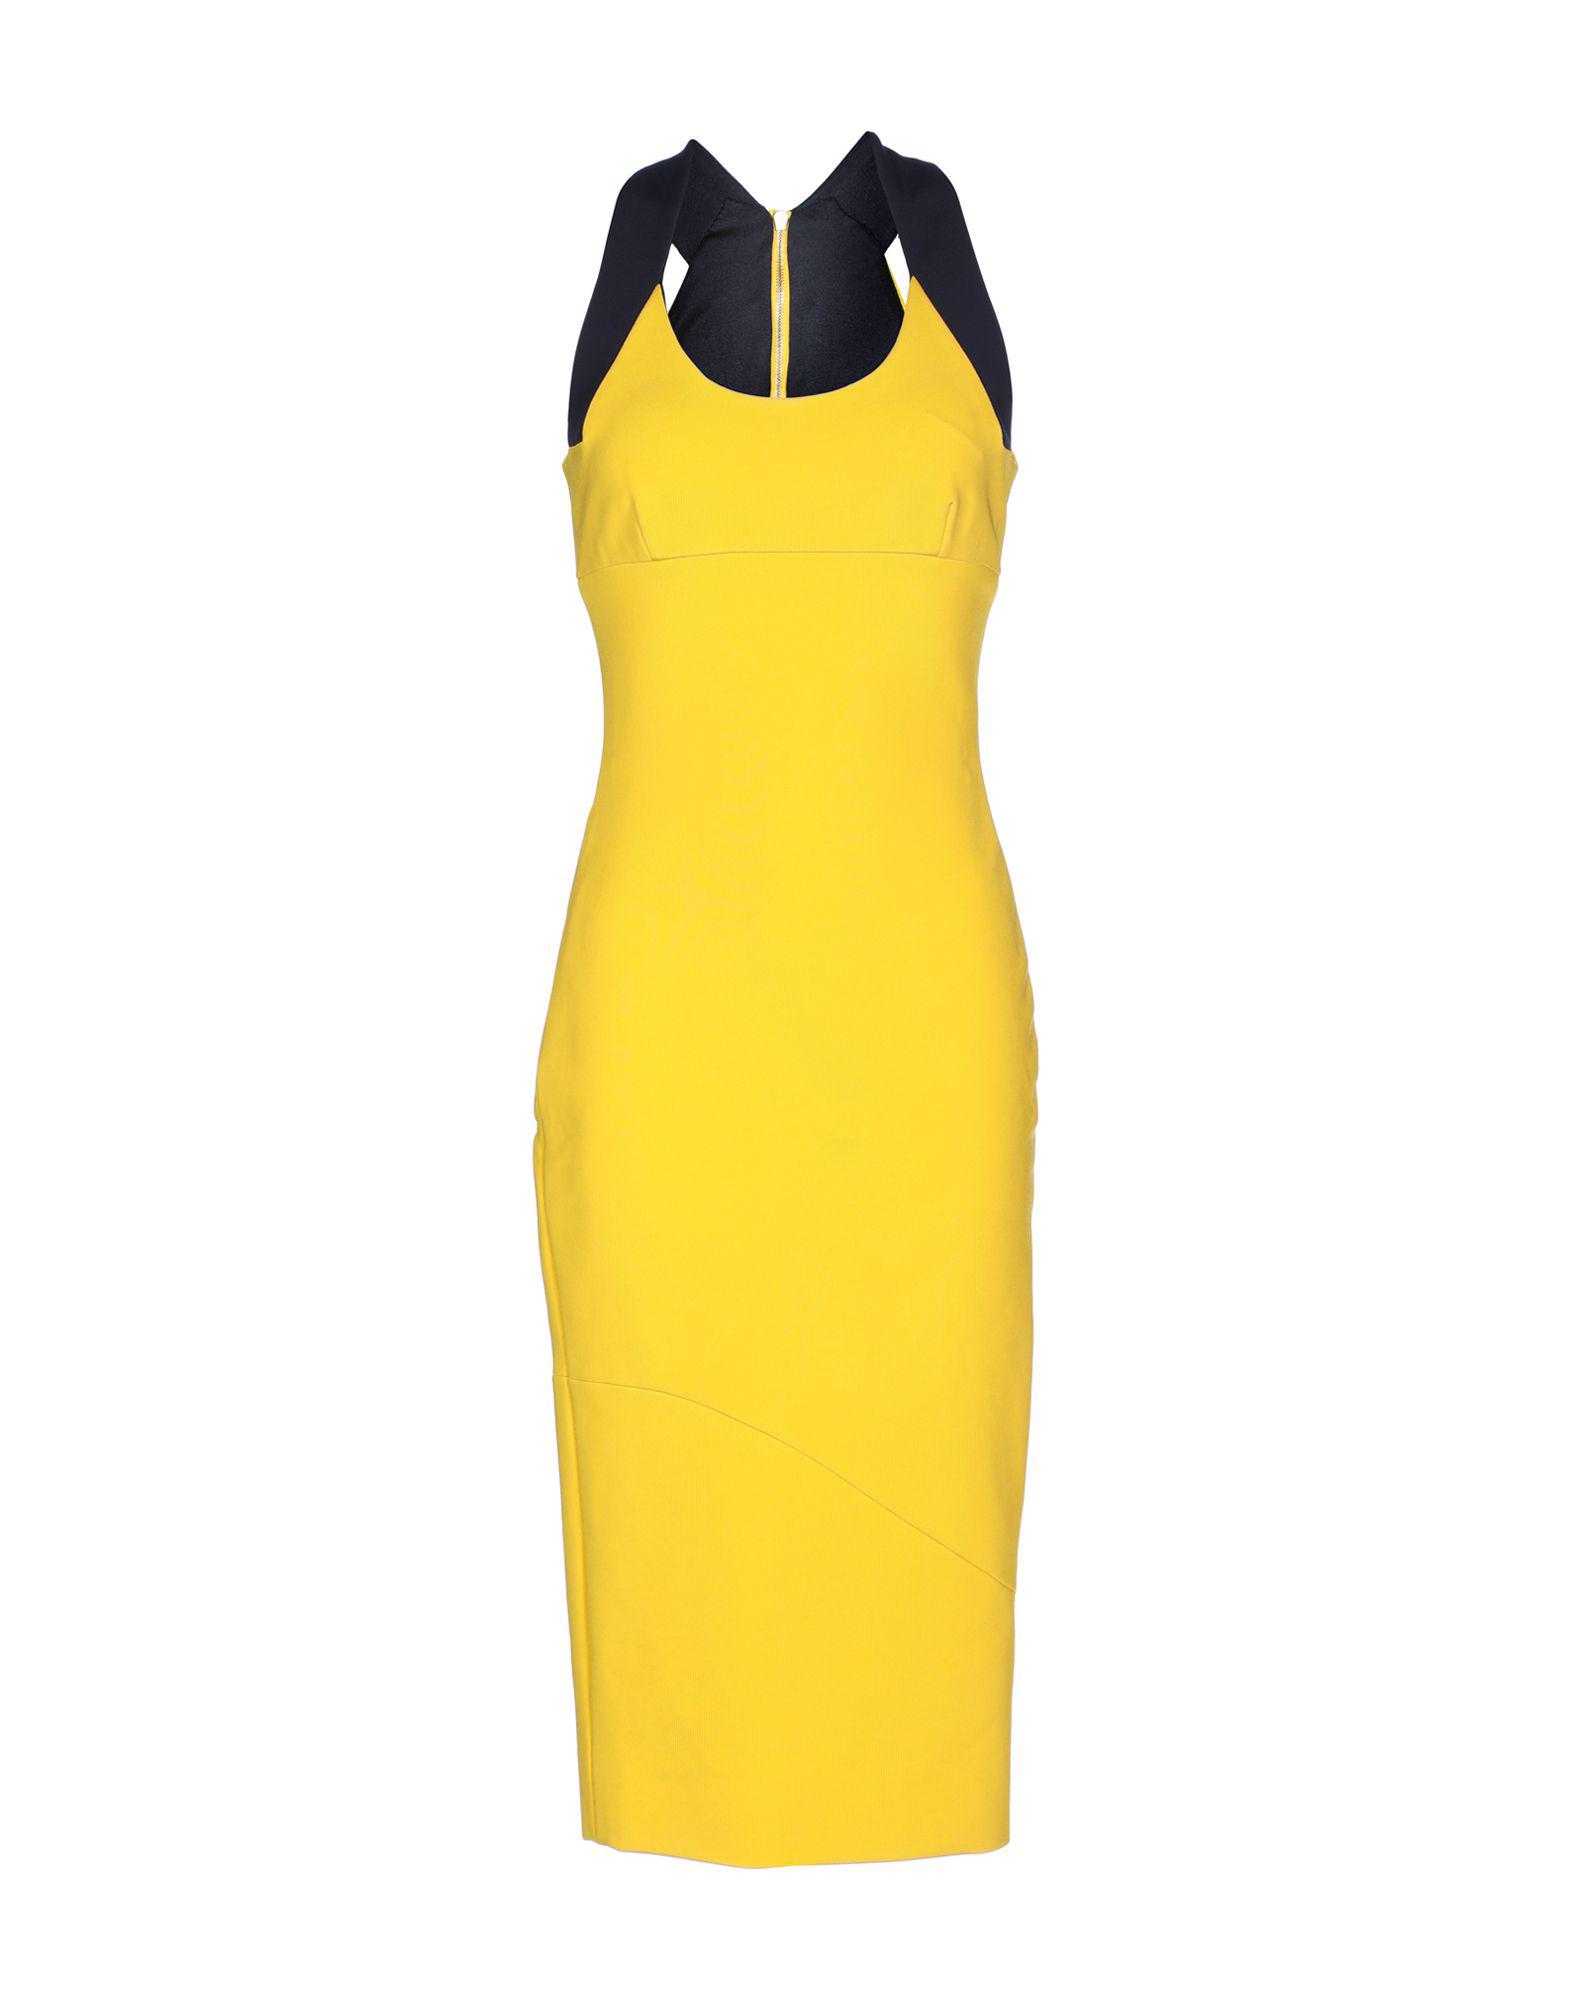 Victoria Beckham Synthetic Knee-length Dress in Yellow - Lyst